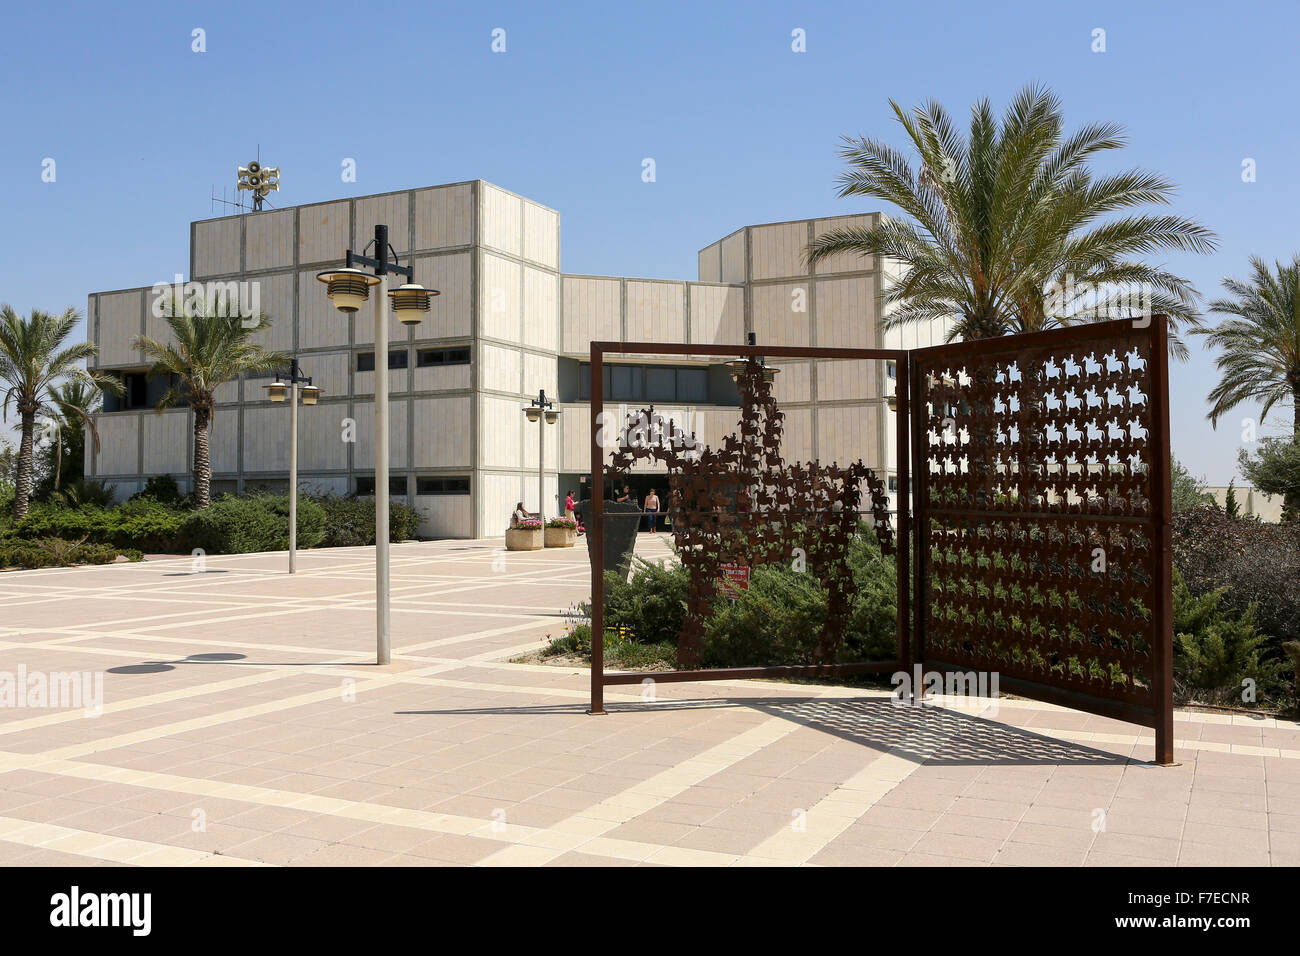 Israel, Omer, Omer Industrial Park, founded by Stef Wertheimer and opened in 1995, Stock Photo